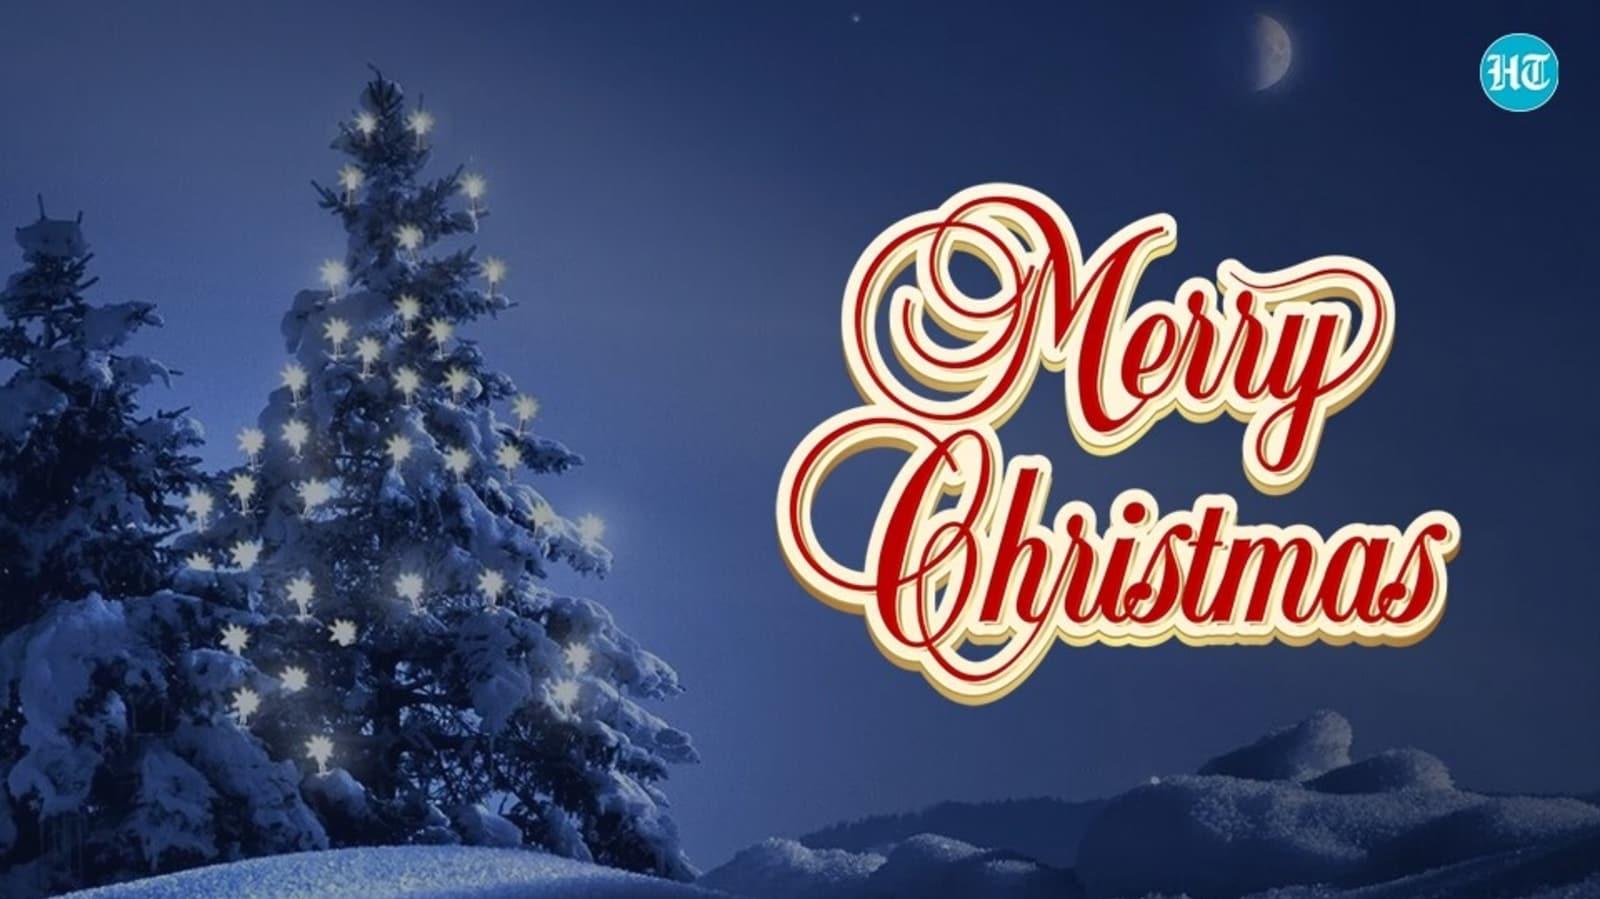 Merry Christmas Best Wishes Image And Messages To Share